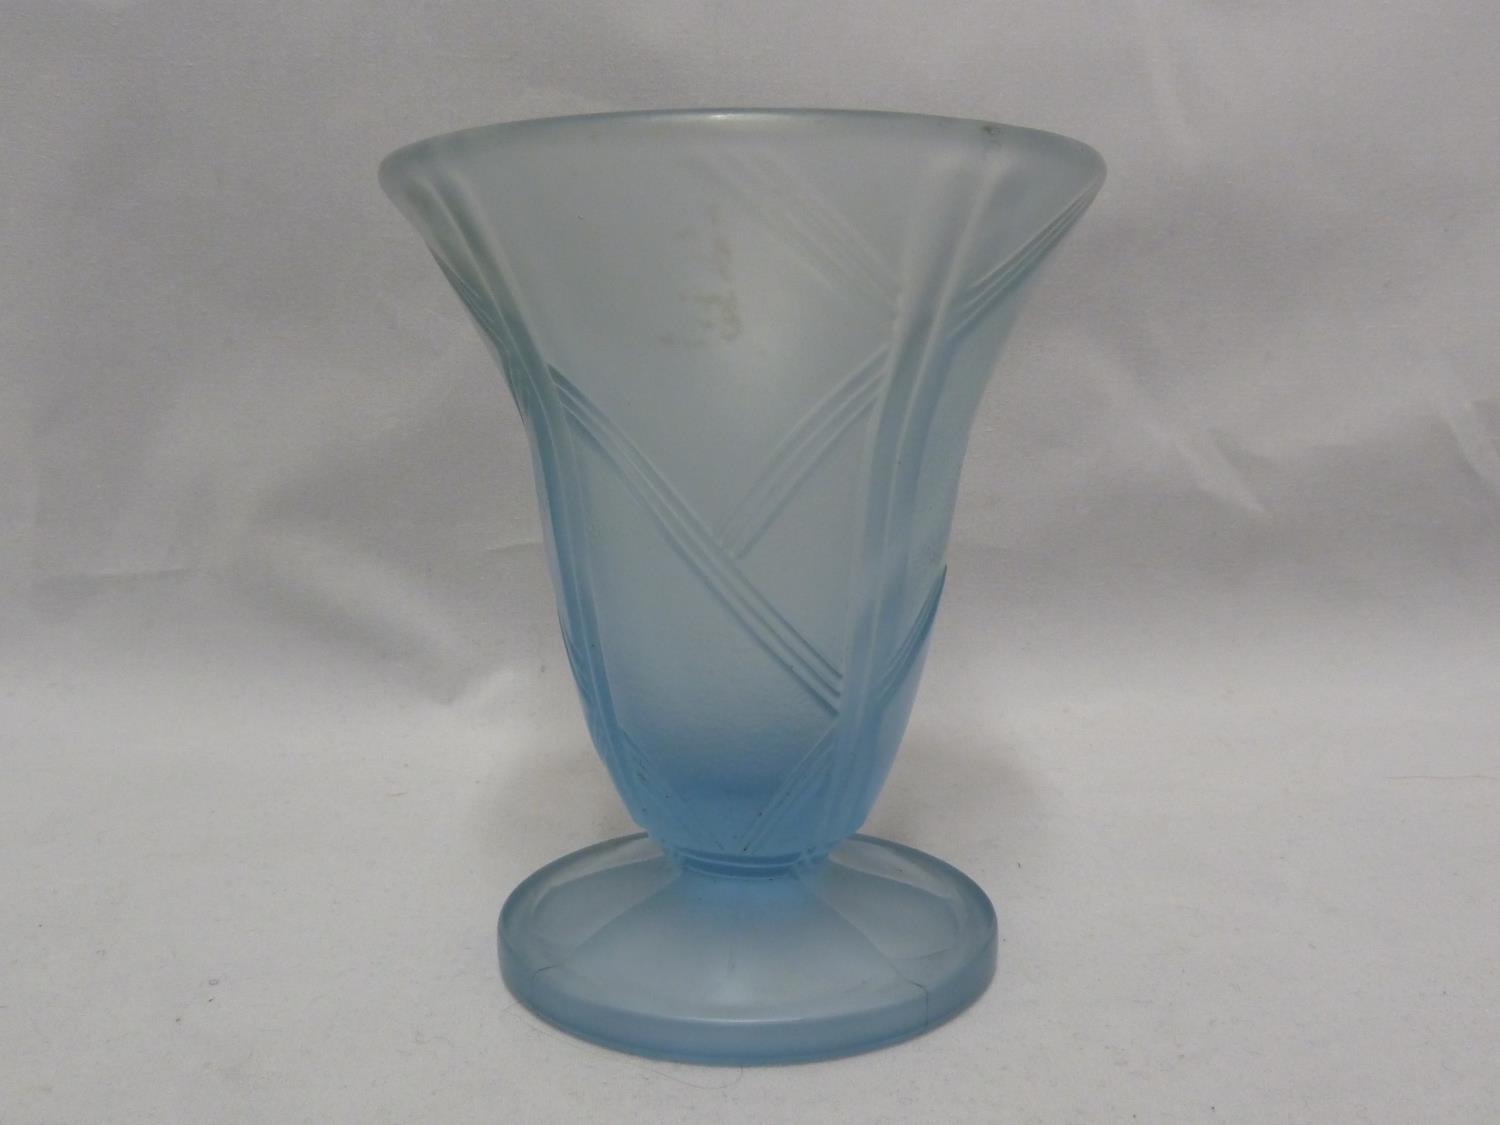 A Group of Art Deco blue glass wares, including a clock case, decorated with two semi clad women - Image 7 of 29